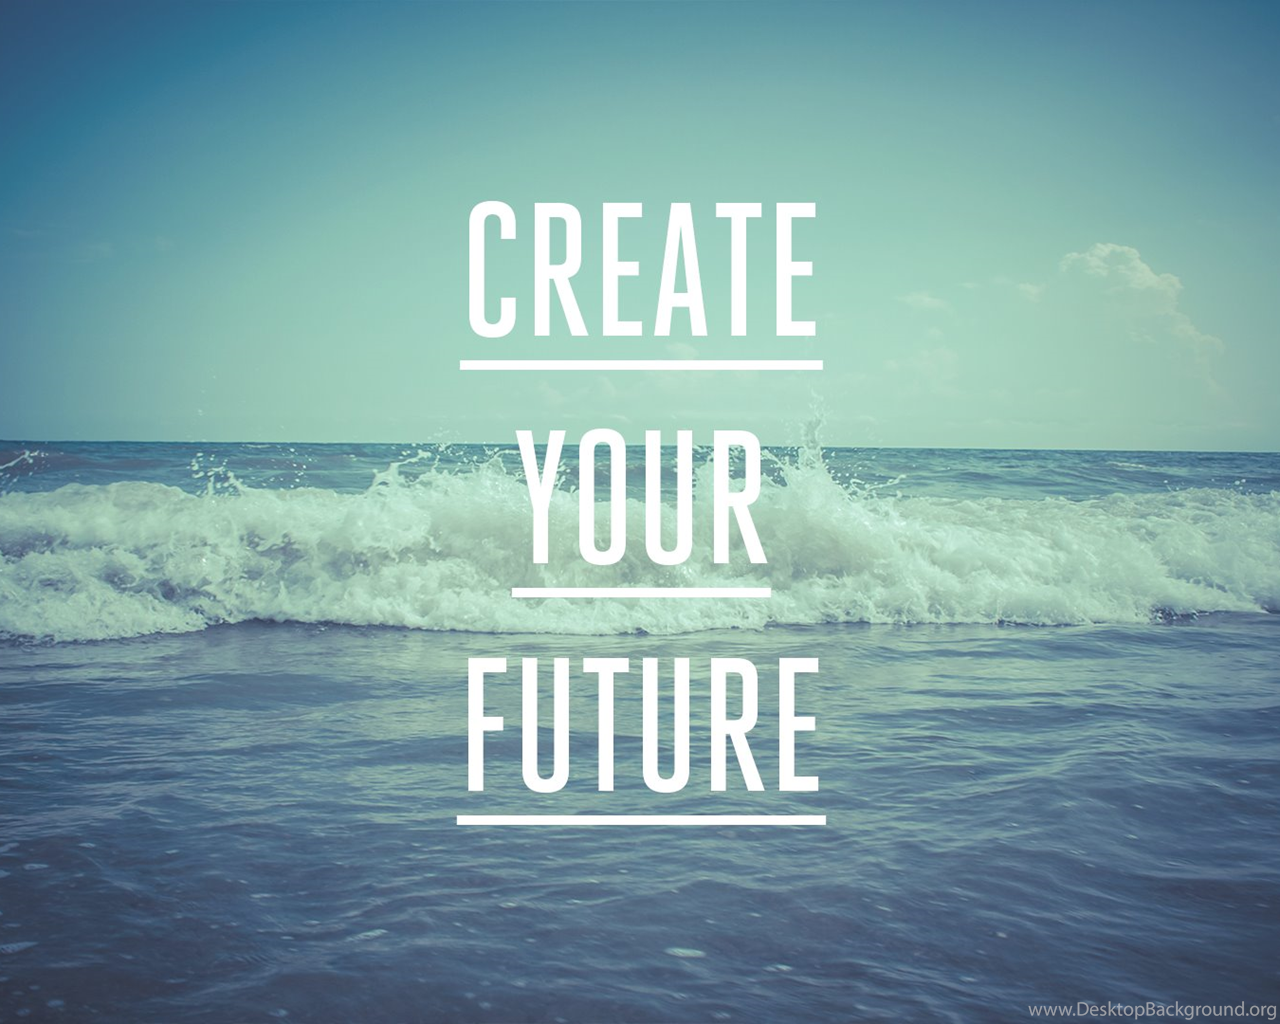 Take your future. Create the Future. Your Future. Картинки про будущее с надписью. Your Future is created by what you обои.